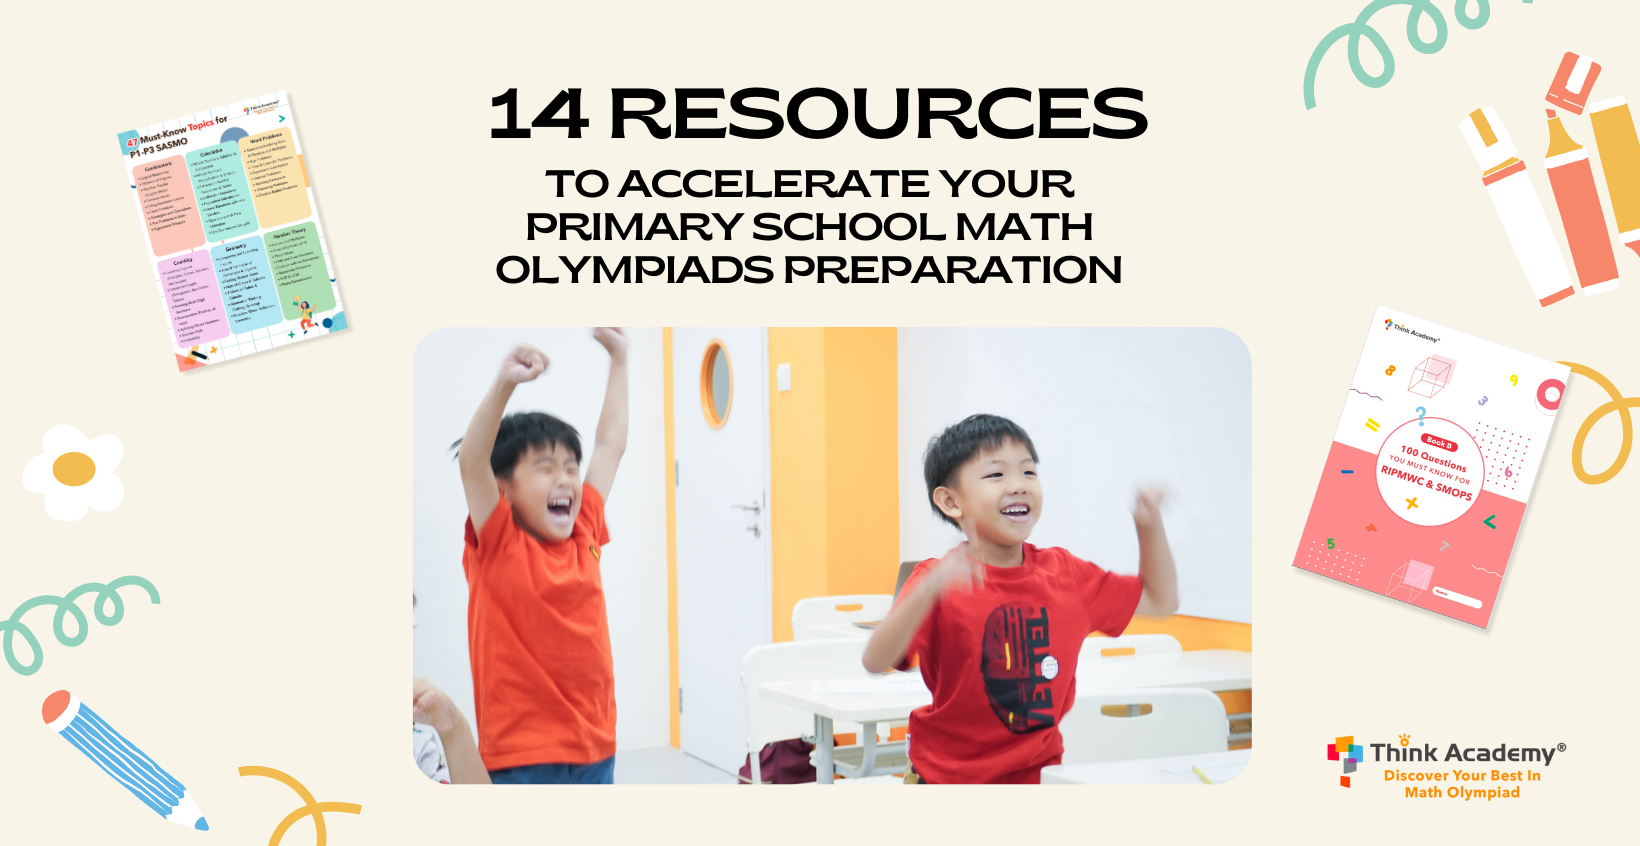 14 Resources To Accelerate Your Primary School Math Olympiad Preparation